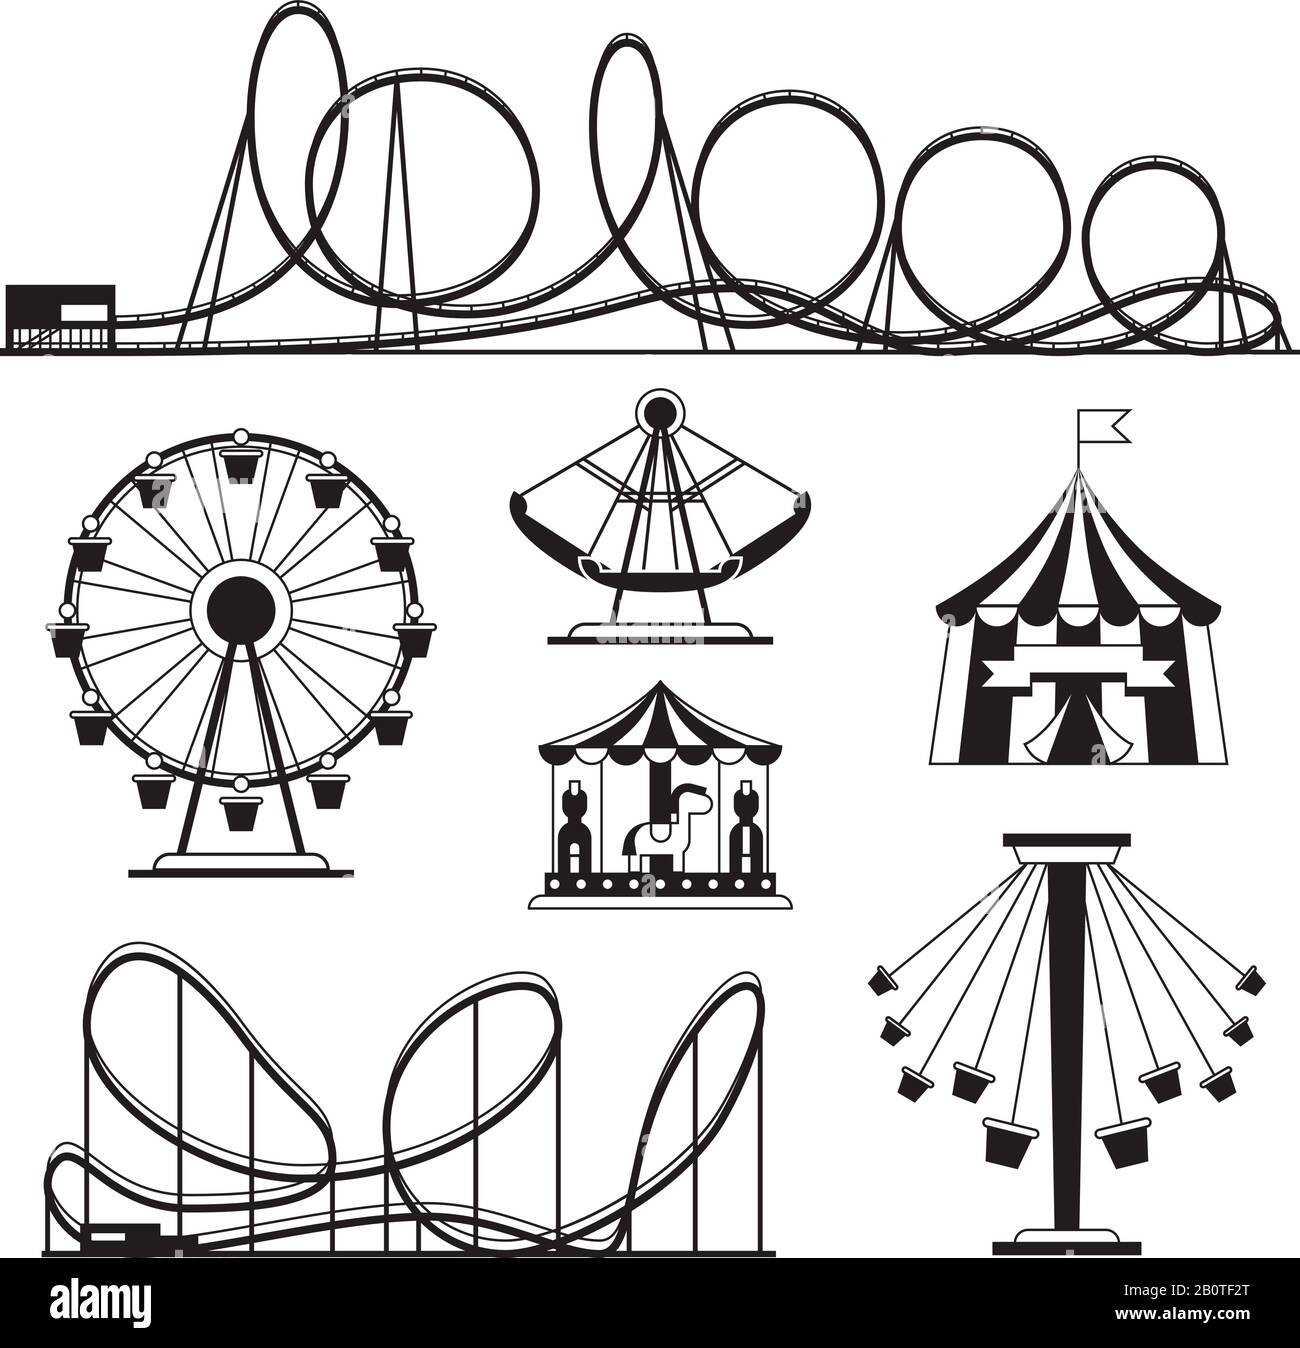 Amusement park, roller coasters and carousel vector icons. Festival and rollercoaster attraction illustration Stock Vector